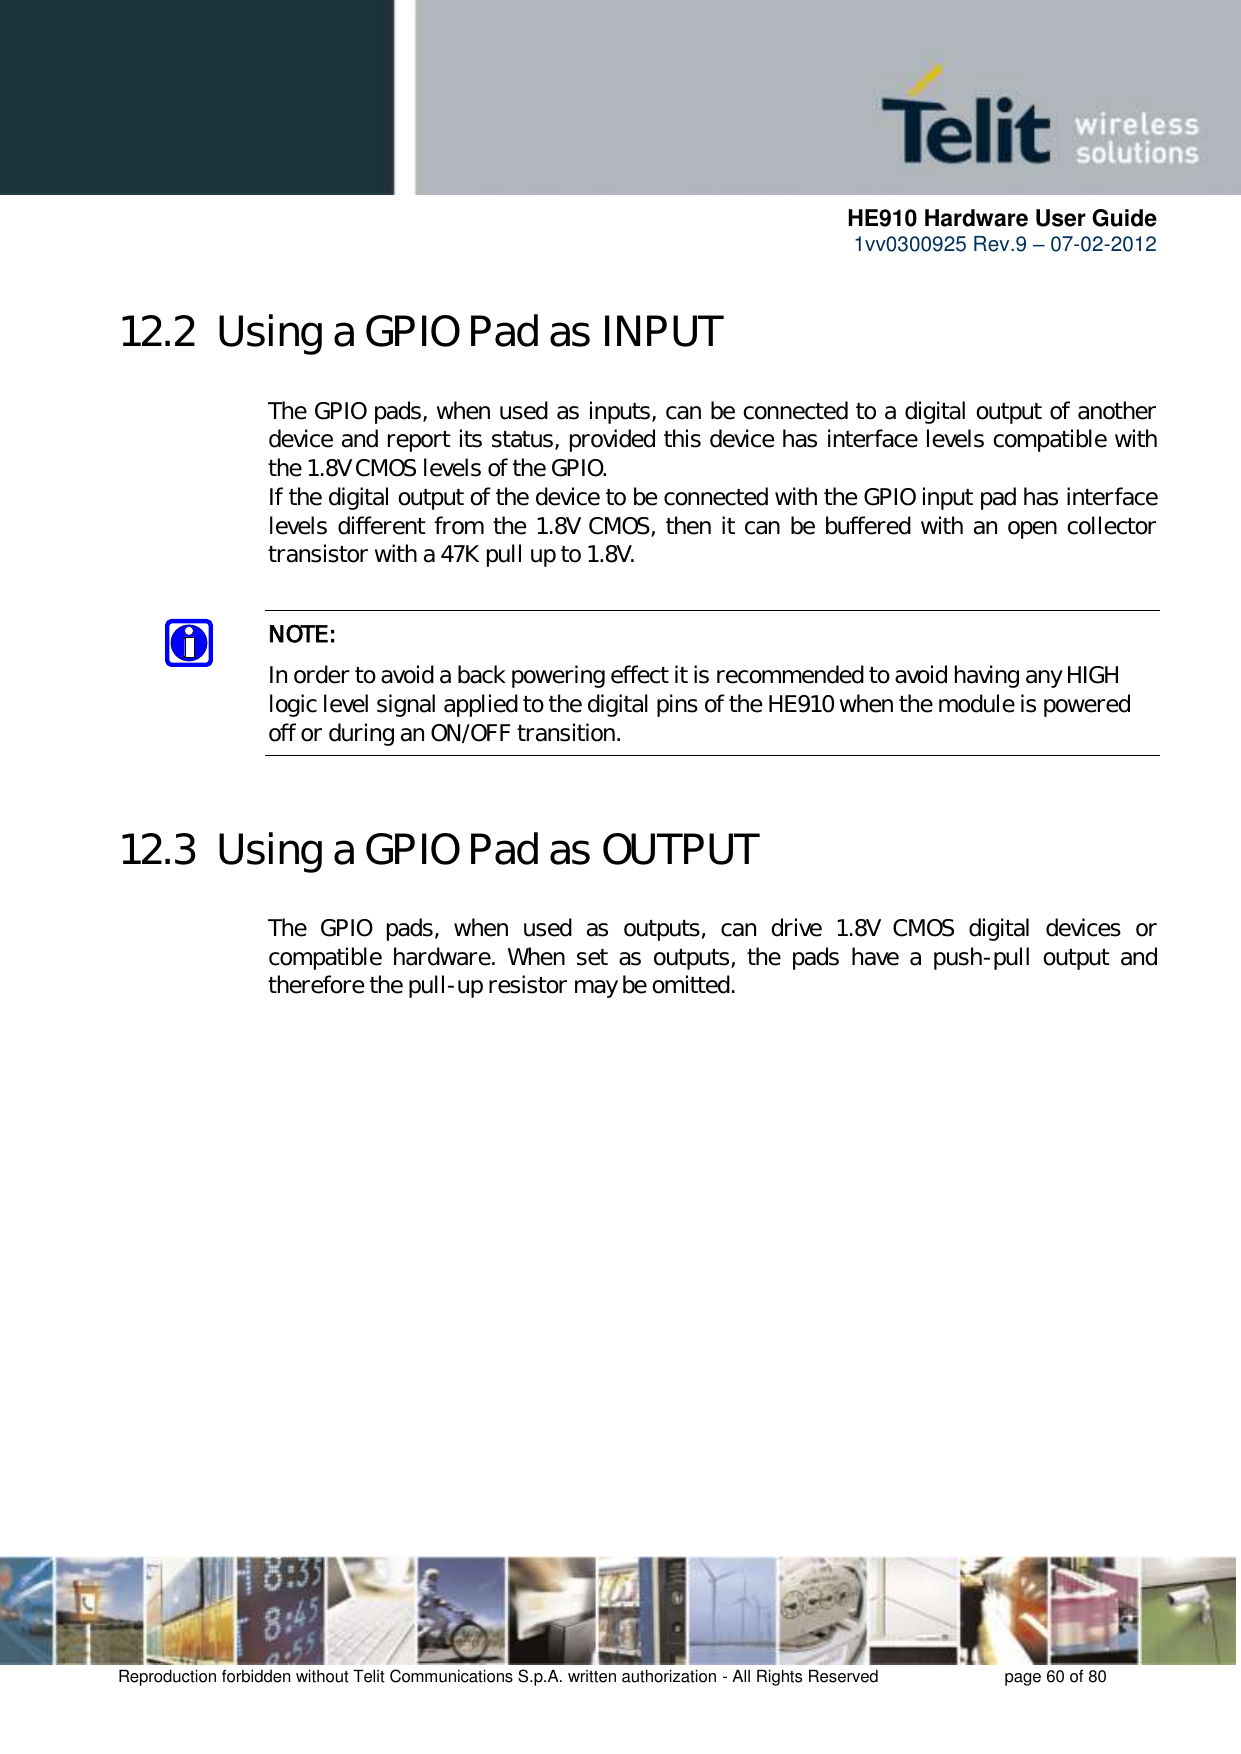      HE910 Hardware User Guide 1vv0300925 Rev.9 – 07-02-2012    Reproduction forbidden without Telit Communications S.p.A. written authorization - All Rights Reserved    page 60 of 80  12.2  Using a GPIO Pad as INPUT The GPIO pads, when used as inputs, can be connected to a digital output of another device and report its status, provided this device has interface levels compatible with the 1.8V CMOS levels of the GPIO.  If the digital output of the device to be connected with the GPIO input pad has interface levels different from the 1.8V CMOS, then it can be buffered with an open collector transistor with a 47K pull up to 1.8V.  NOTE: In order to avoid a back powering effect it is recommended to avoid having any HIGH logic level signal applied to the digital pins of the HE910 when the module is powered off or during an ON/OFF transition.  12.3  Using a GPIO Pad as OUTPUT The  GPIO  pads,  when  used  as  outputs,  can  drive  1.8V  CMOS  digital  devices  or compatible  hardware.  When  set  as  outputs,  the  pads  have  a  push-pull  output  and therefore the pull-up resistor may be omitted.  